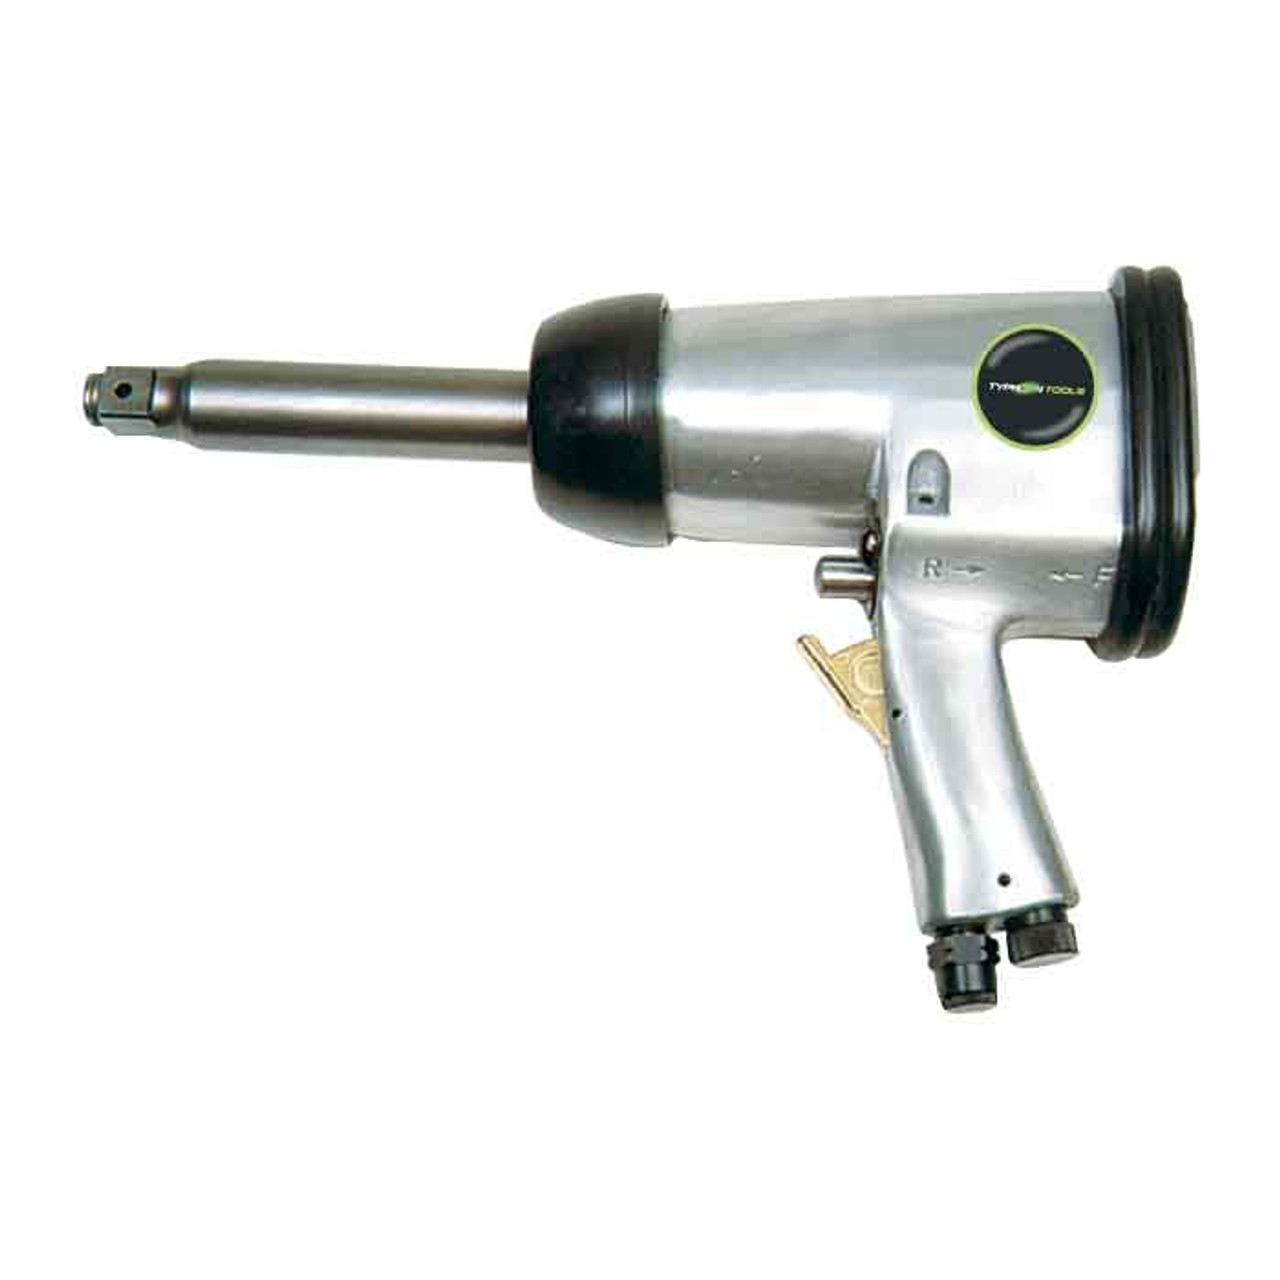 3/4" Impact Wrench With 6" Anvil 800Ft-Lbs